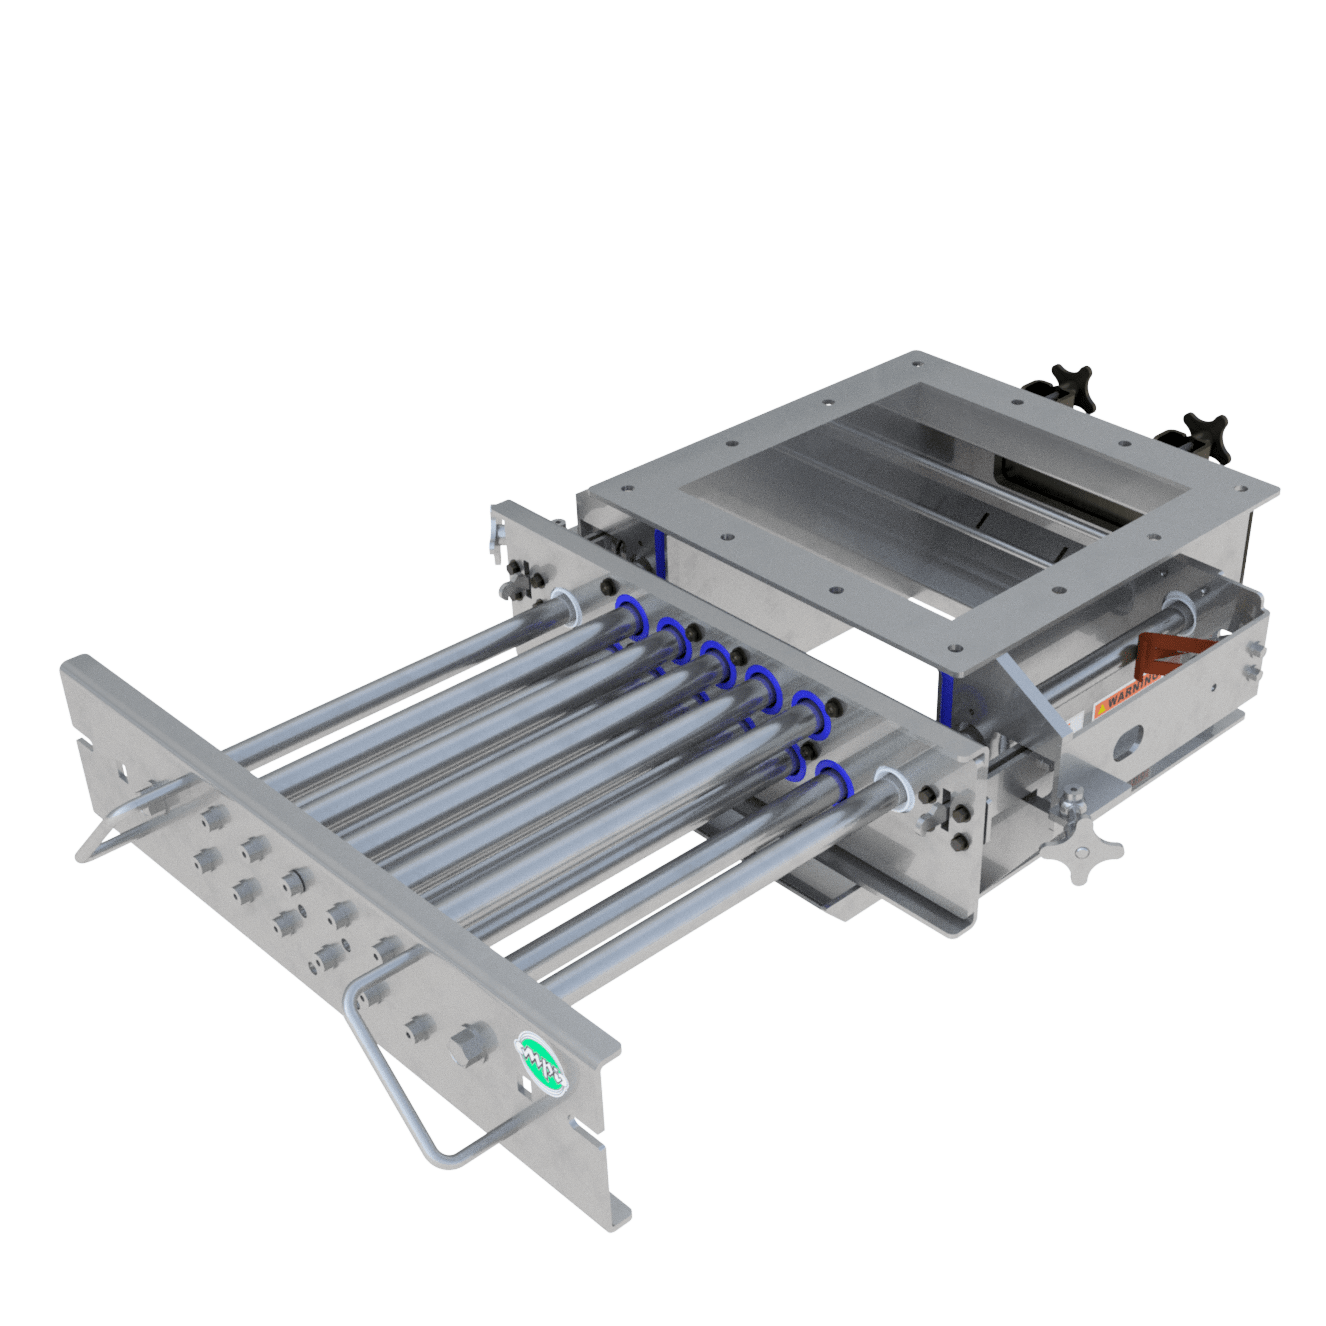 Magnetic Product Inc. (MPI) Quick-Clean drawer magnets feature two tiers of high-intensity rare earth magnetic tubes that ensure the highest levels of magnetic filtration through direct product contact on the tubes, removing ferrous tramp metal from the product stream.